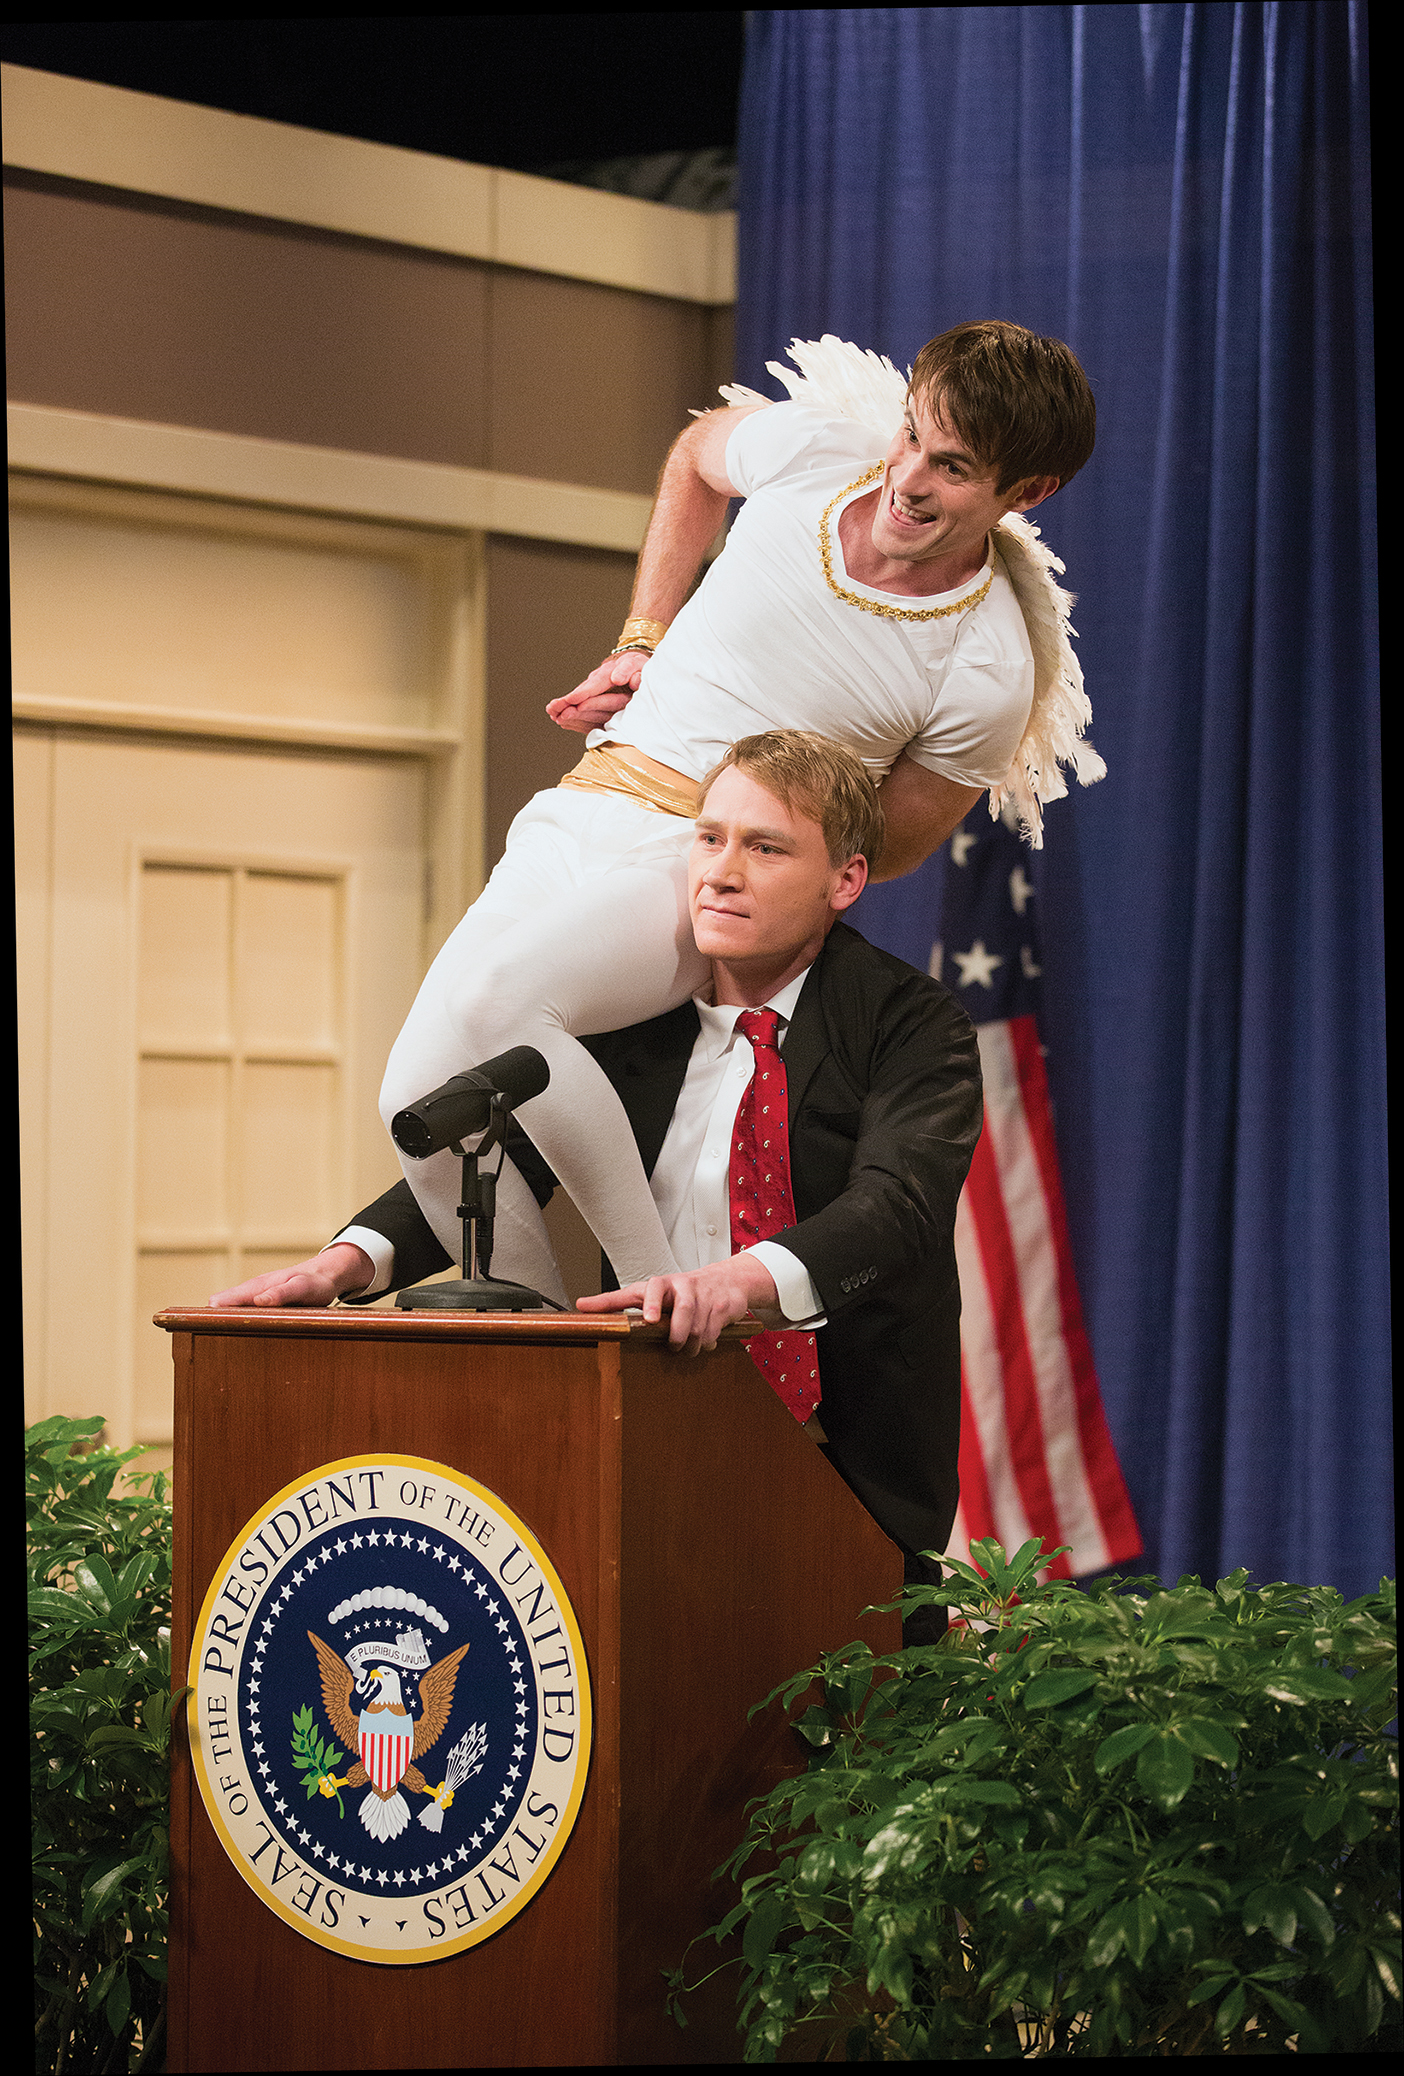 A cast member dressed as an angel sits on the shoulder of another cast member dressed as the president of the US.